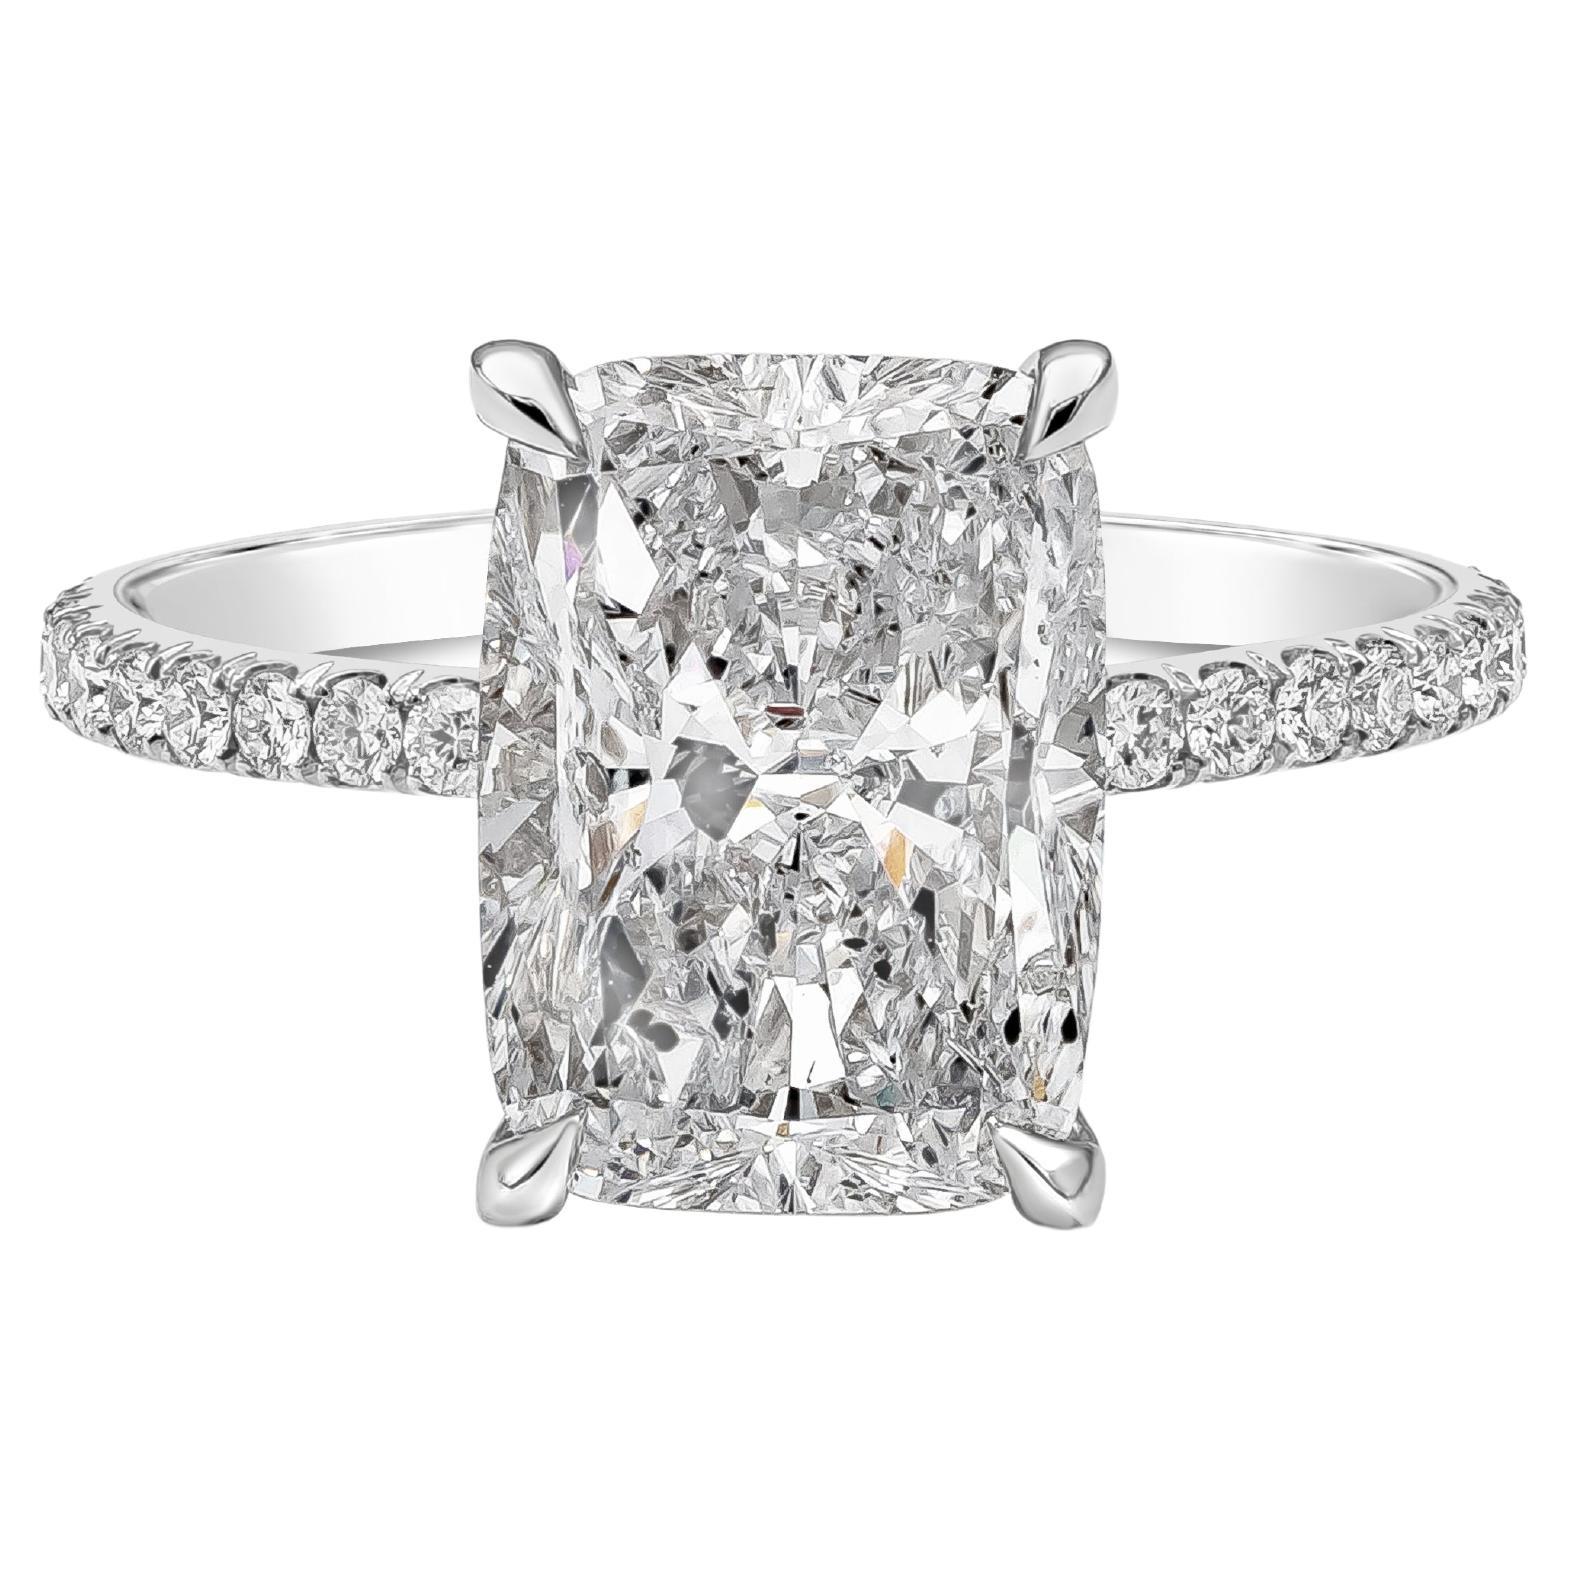 GIA Certified 4.02 Carats Elongated Cushion Cut Diamond Engagement Ring For Sale